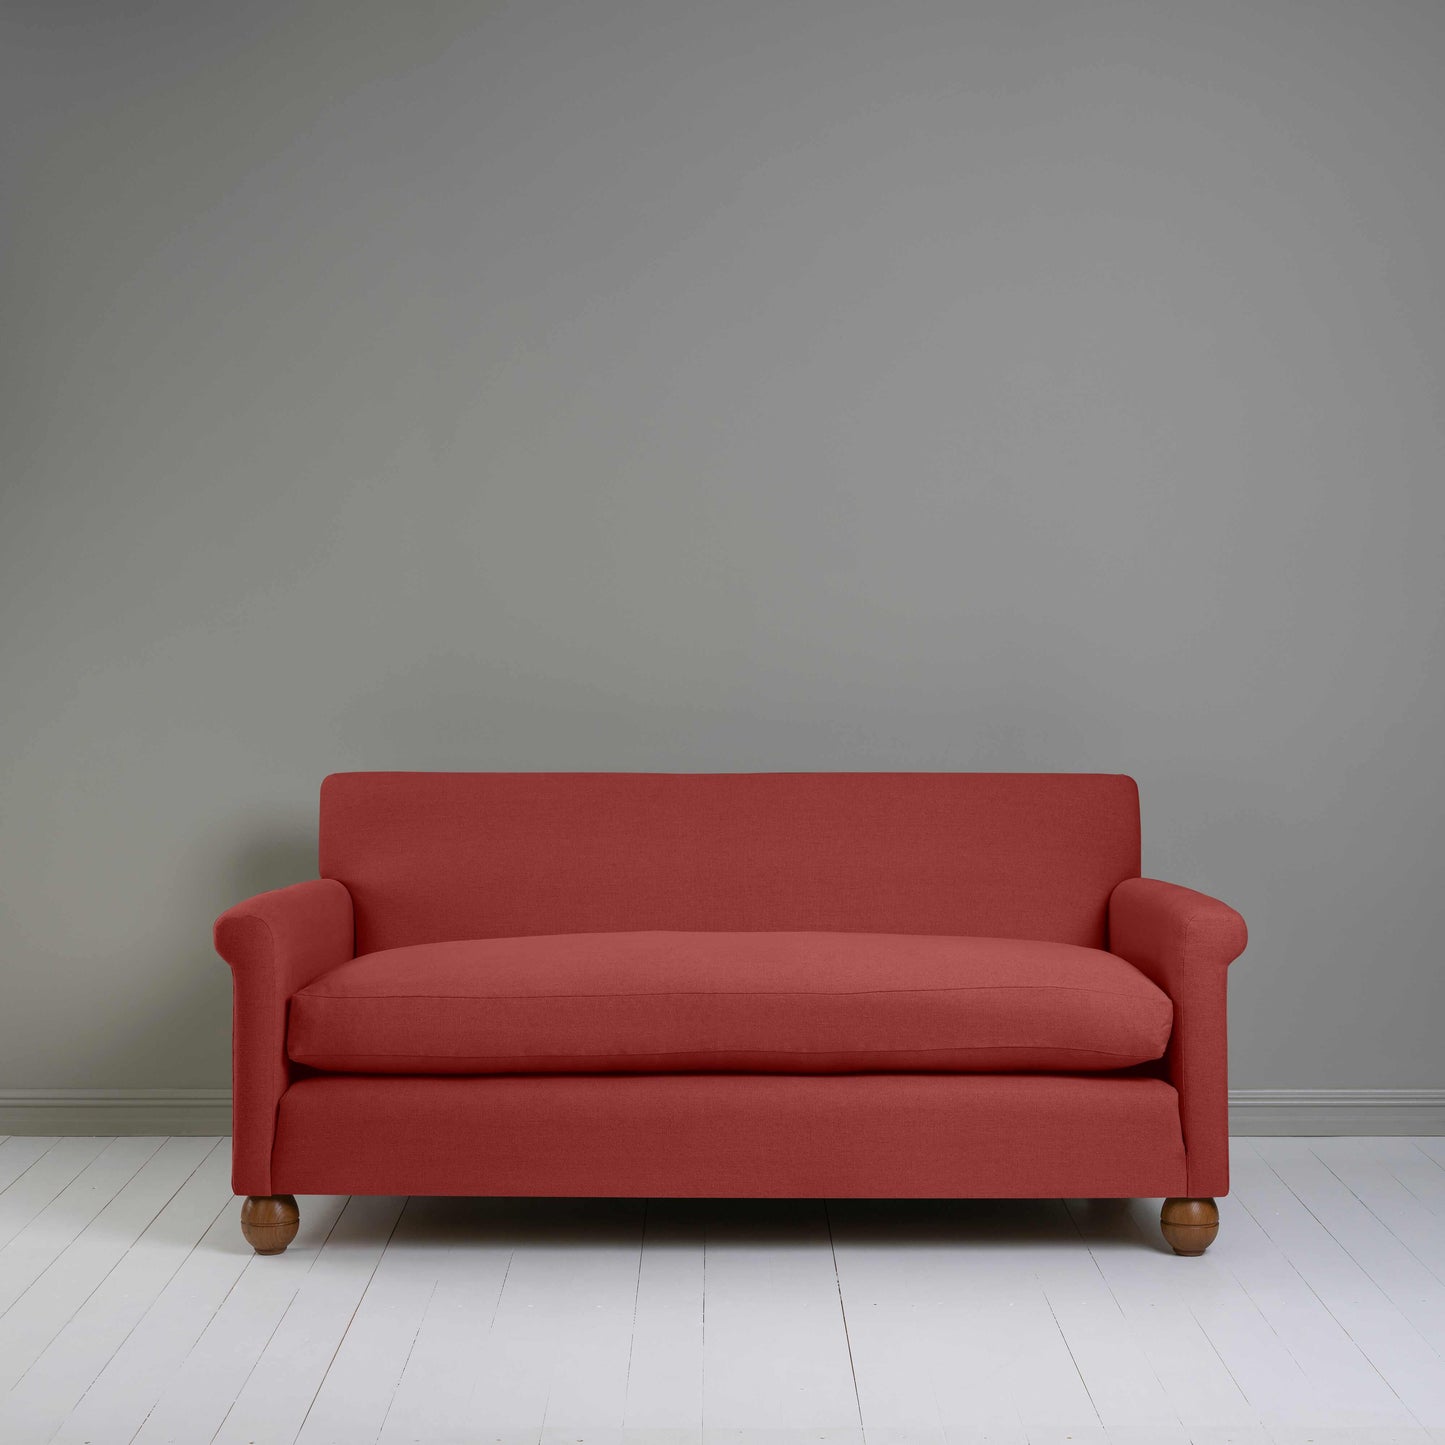 Idler 3 Seater Sofa in Laidback Linen Rouge